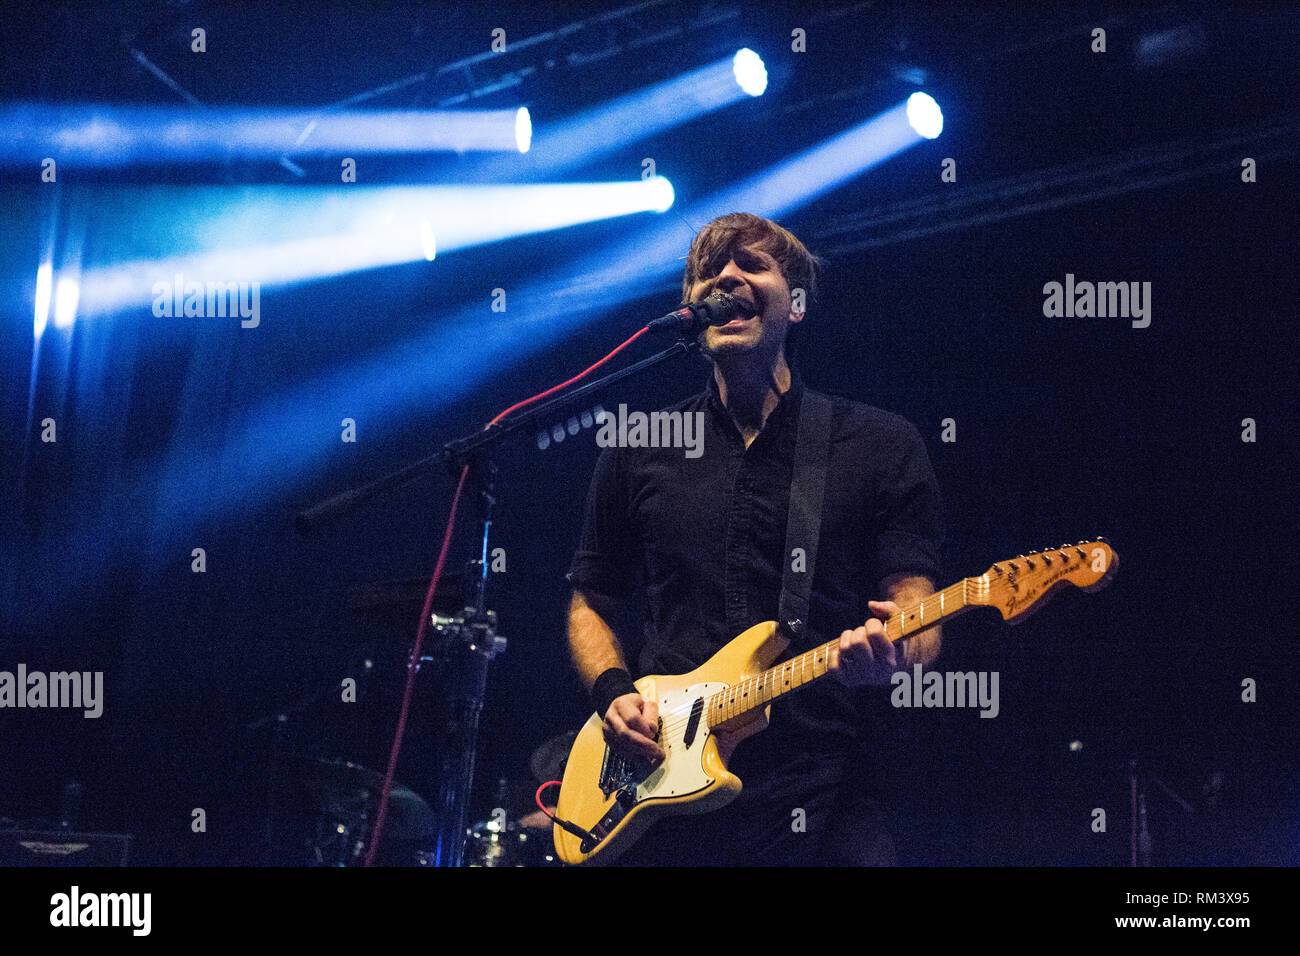 Oslo, Norway. 12th Feb, 2019. Norway, Oslo - February 12, 2019. The American alternative rock band Death Cab For Cutie performs a live concert at Sentrum Scene in Oslo. Here singer and musician Ben Gibbard is seen live on stage. (Photo Credit: Gonzales Photo/Alamy Live News Stock Photo